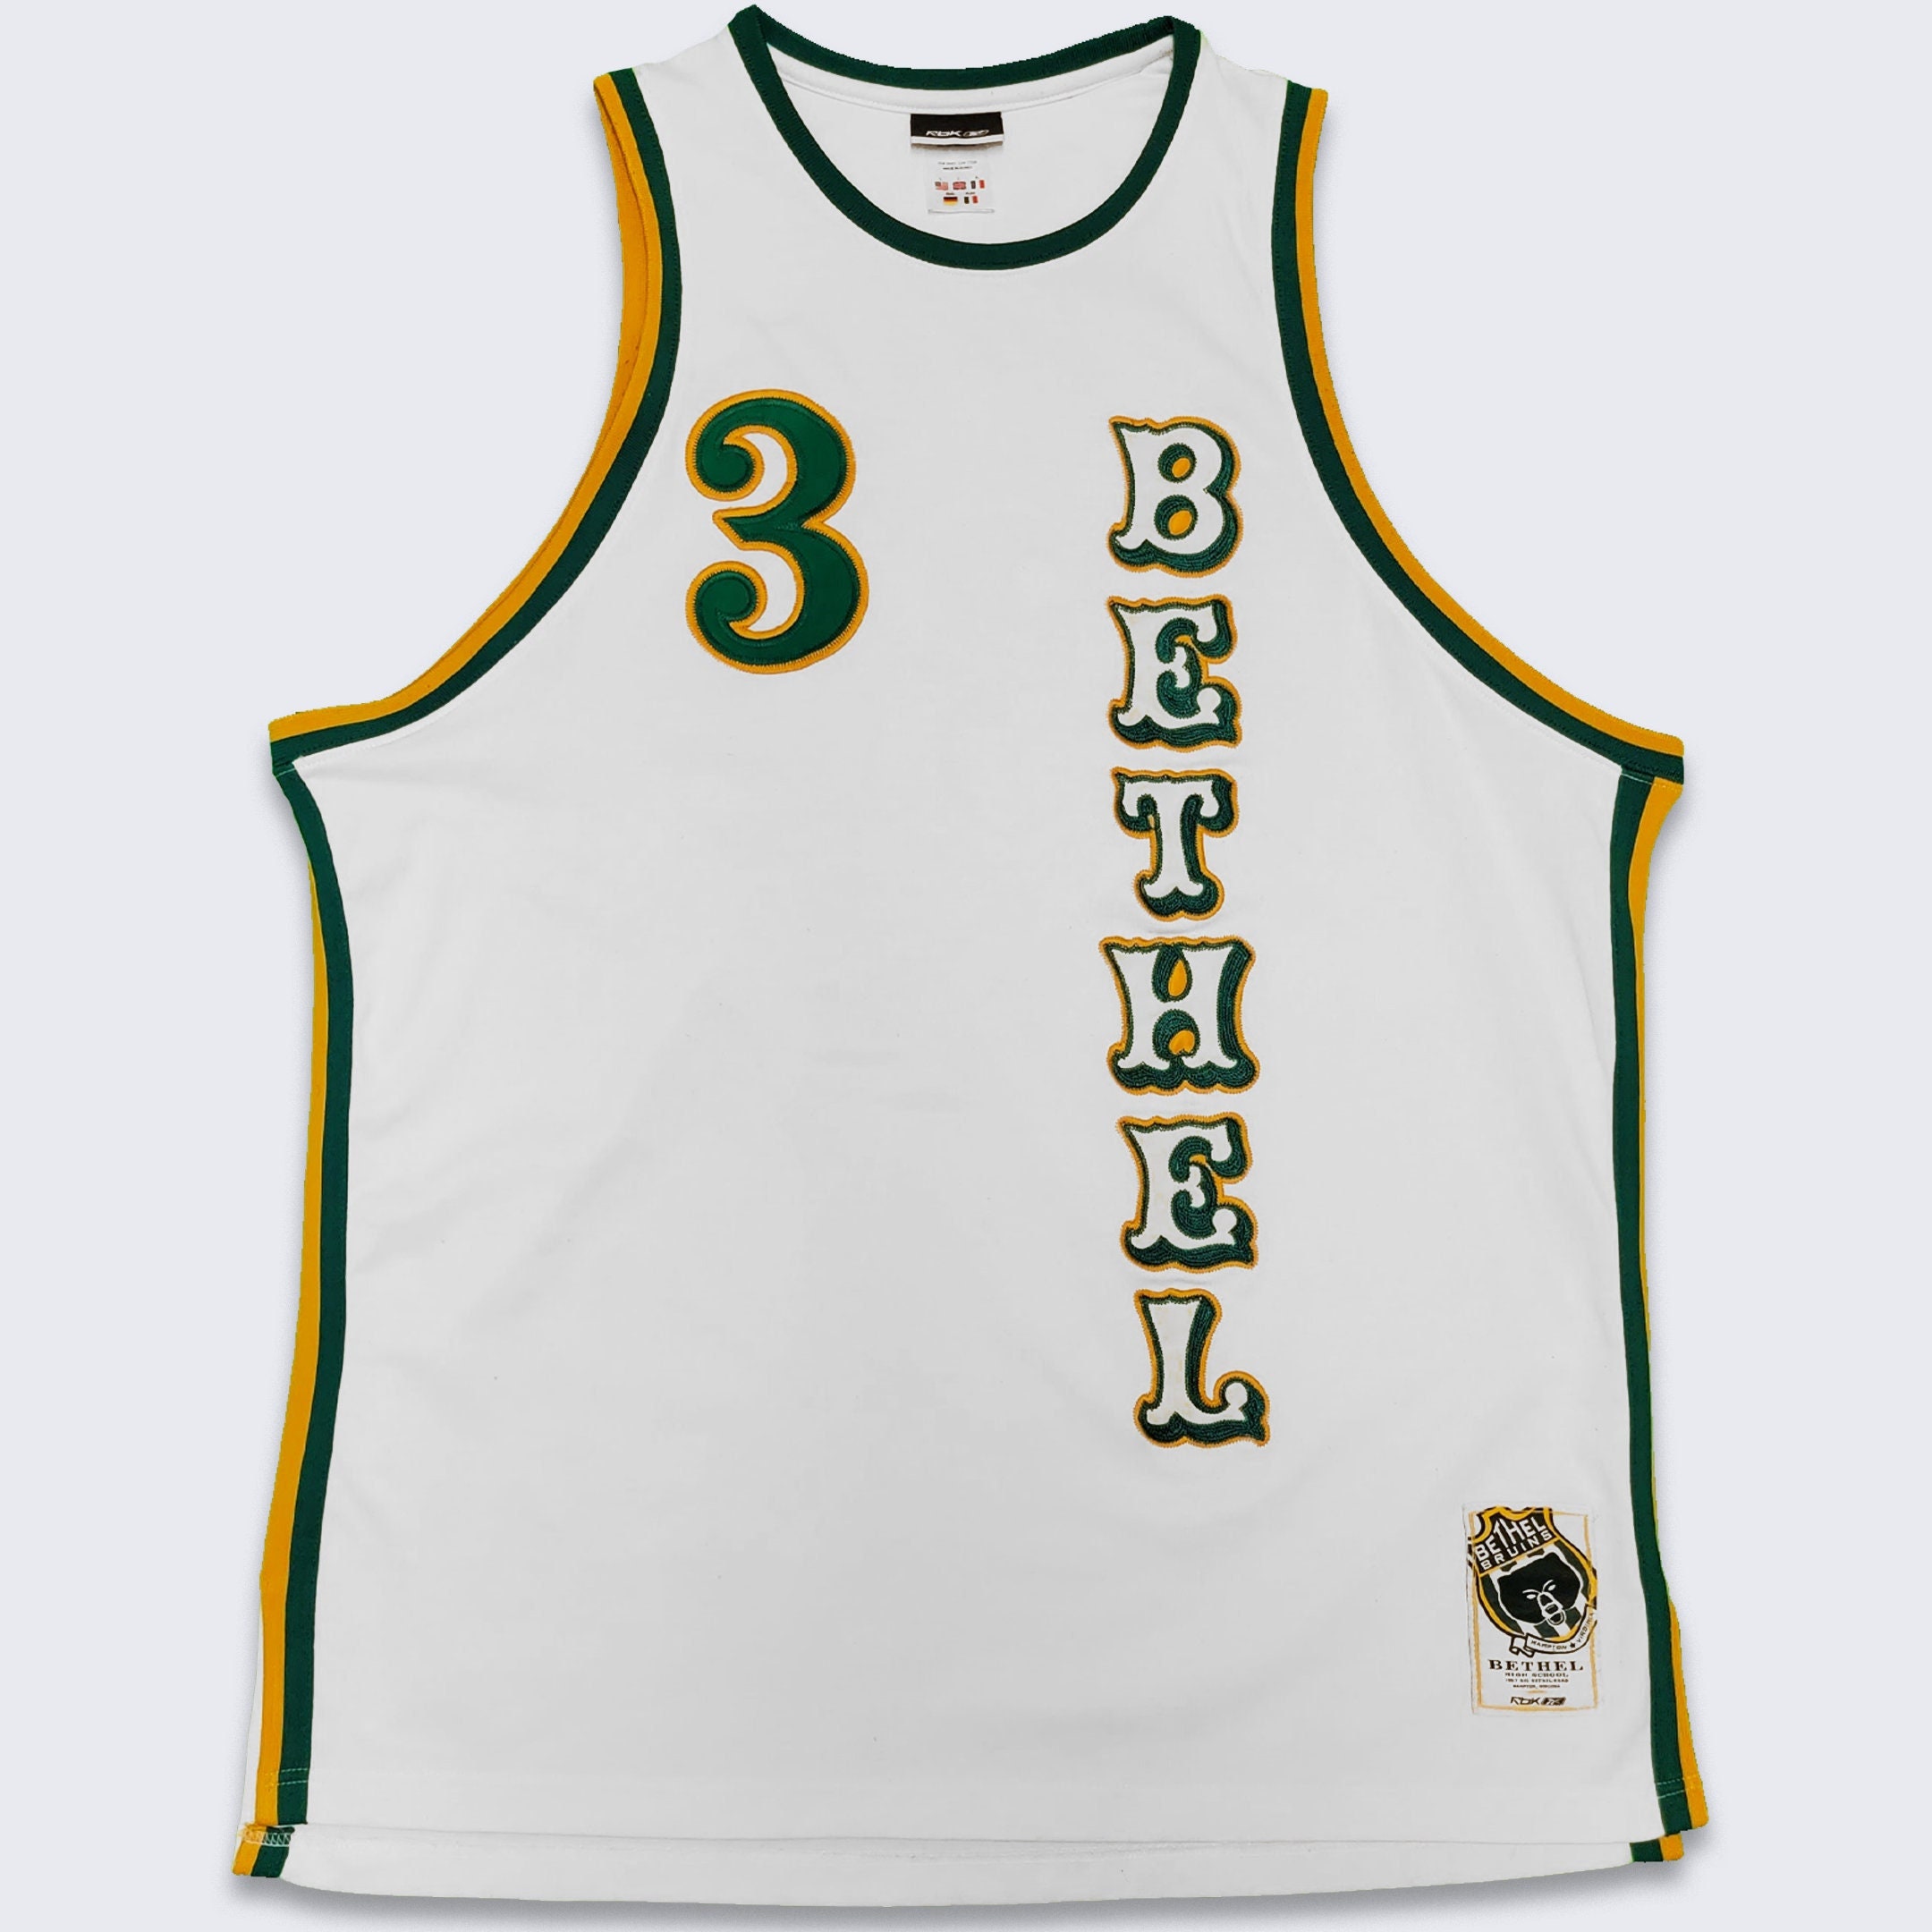 HolySport Indiana Pacers Vintage Brad Miller Reebok Basketball Jersey - White, Yellow and Green Jersey - NBA Licensed - Size Men's XL 